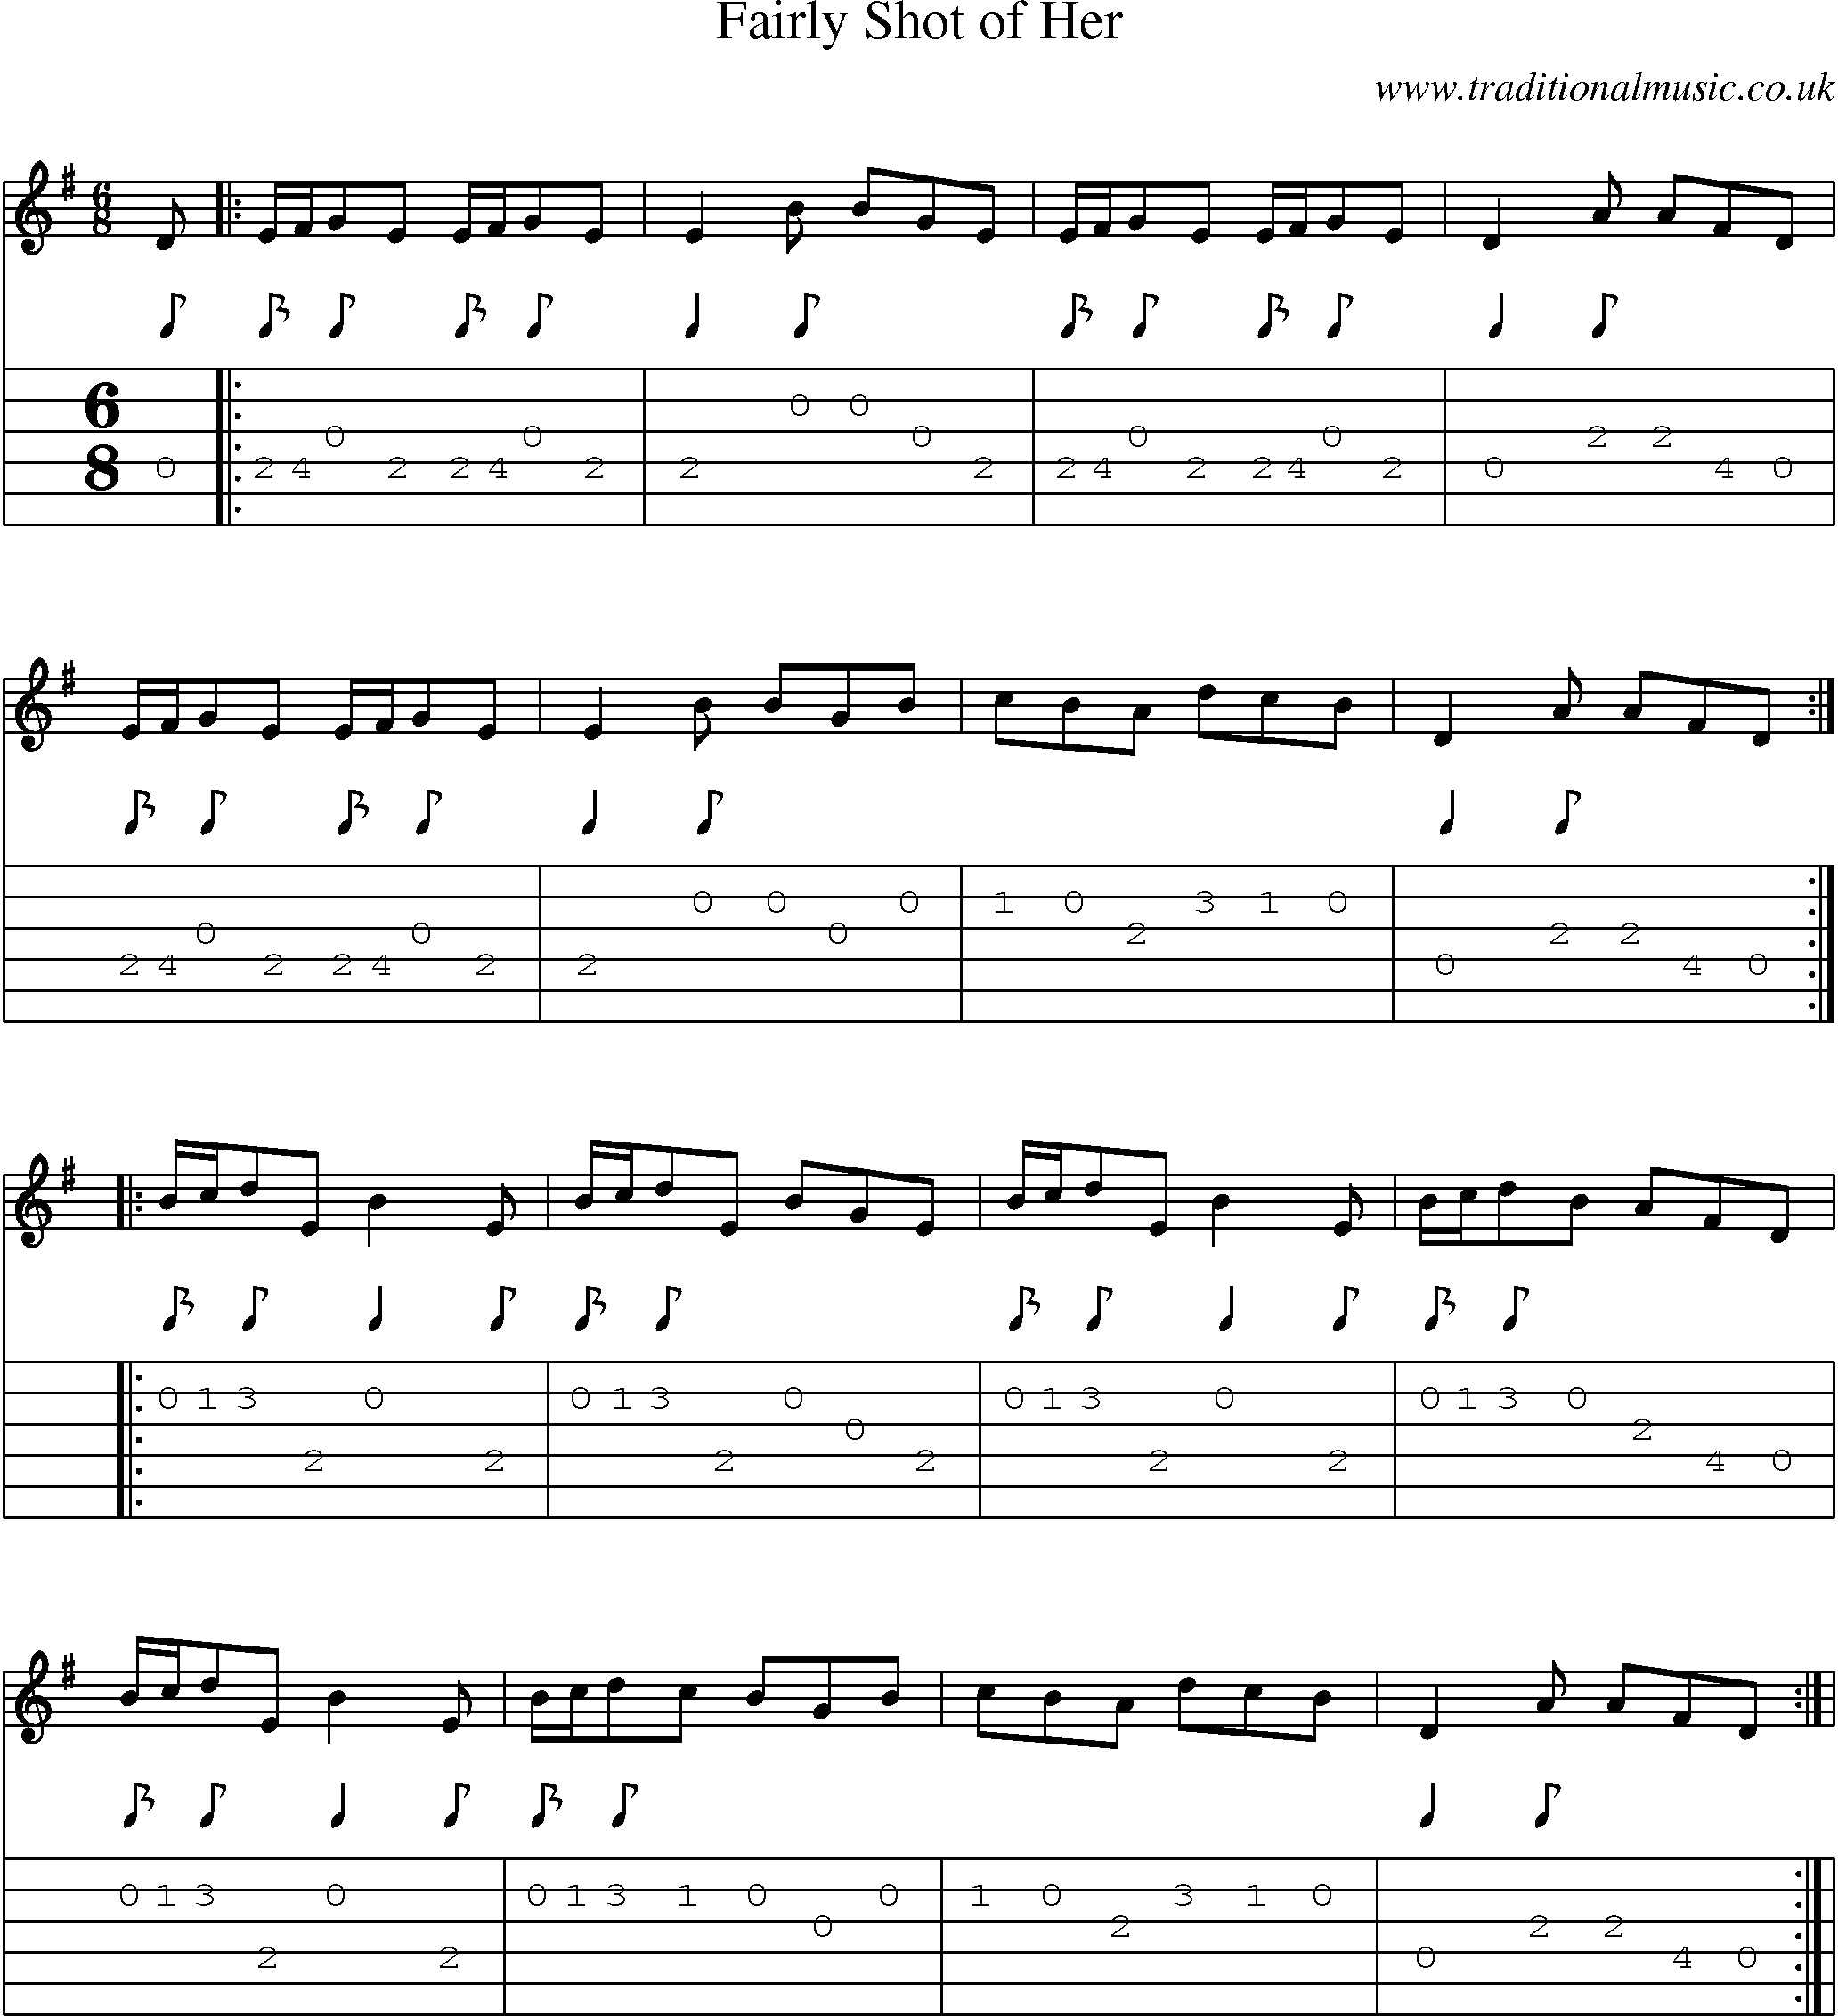 Music Score and Guitar Tabs for Fairly Shot Of Her